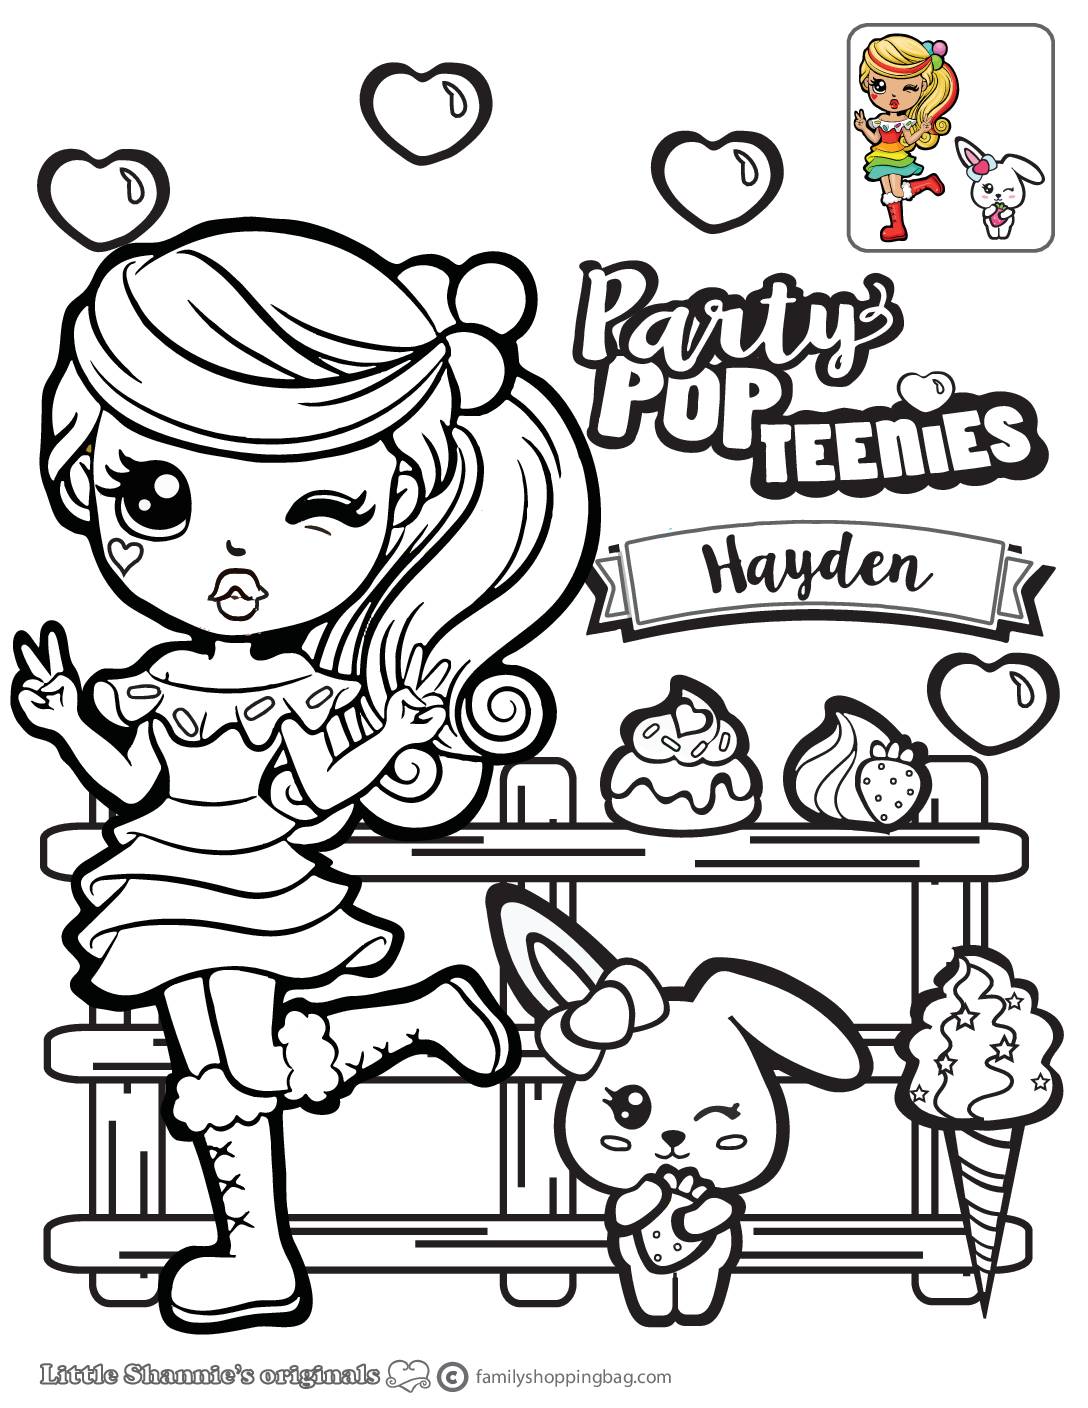 Hayden Coloring Page Party Pop Teenies Coloring Pages